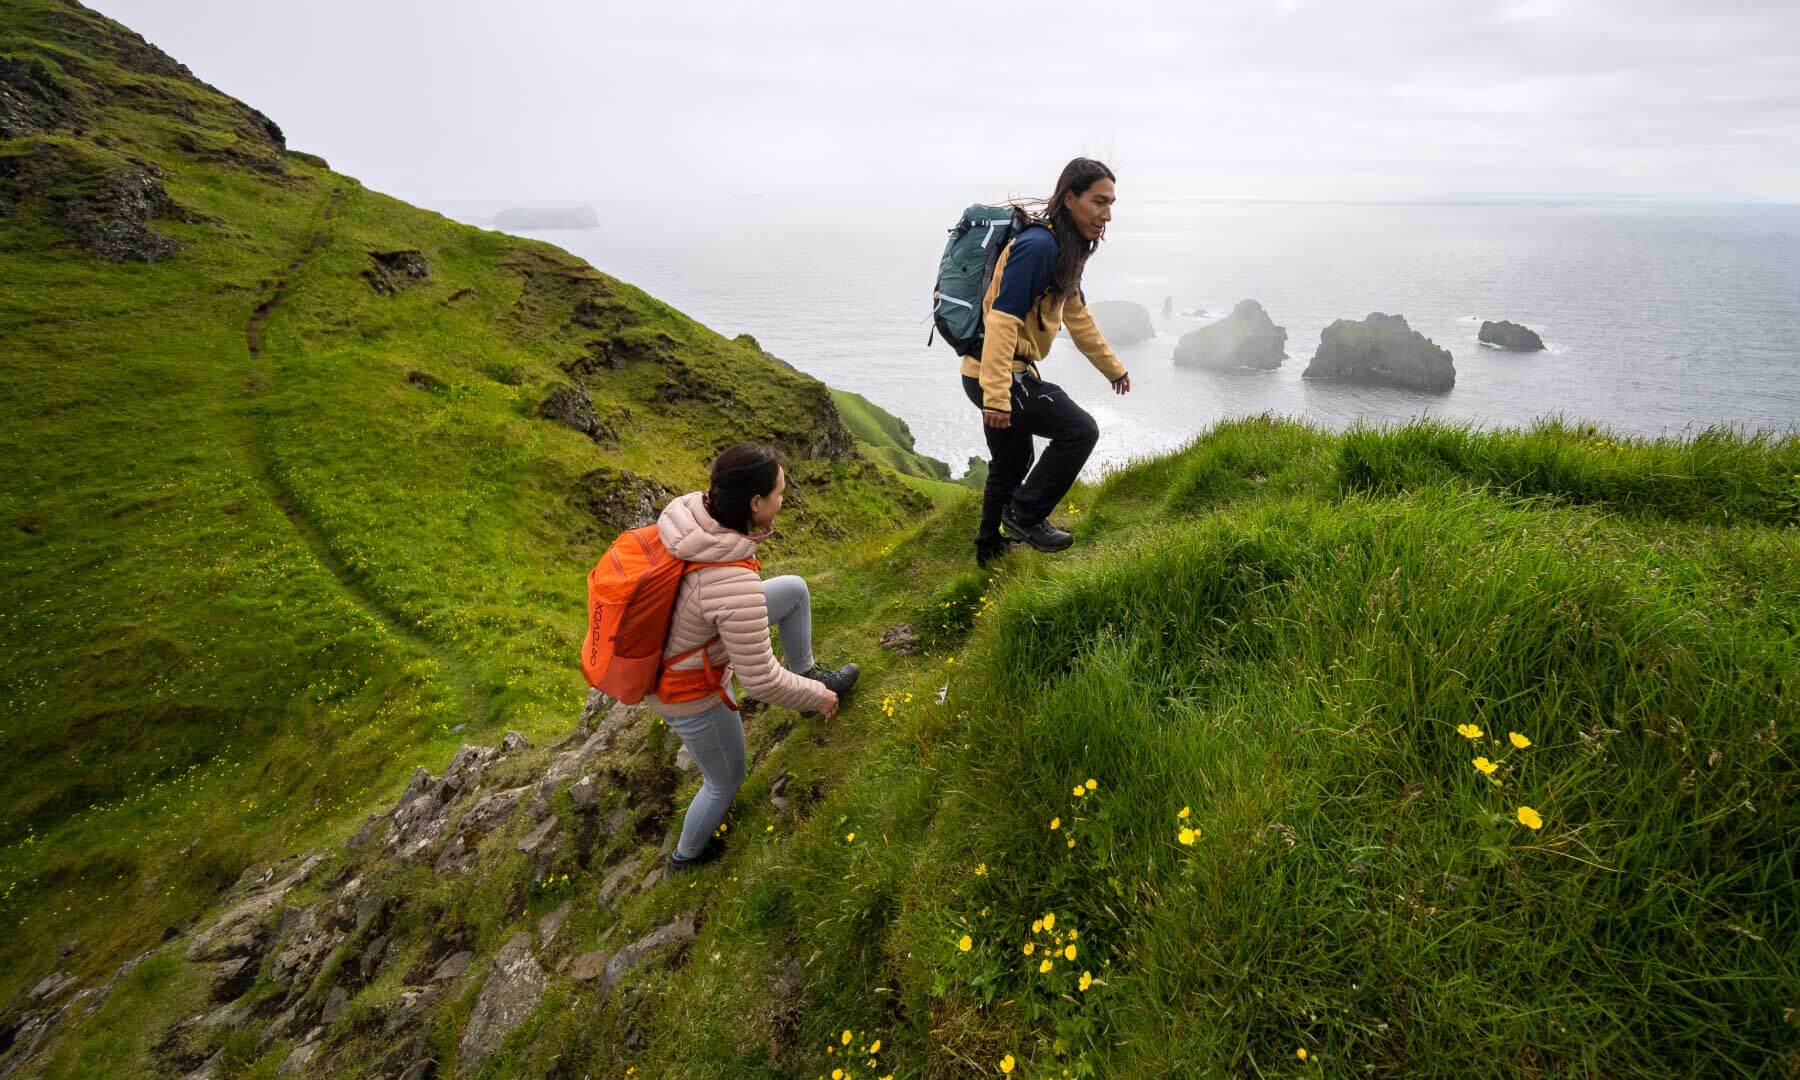 A man and woman hike on a narrow, grassy ridge overlooking an ocean with scattered islands.